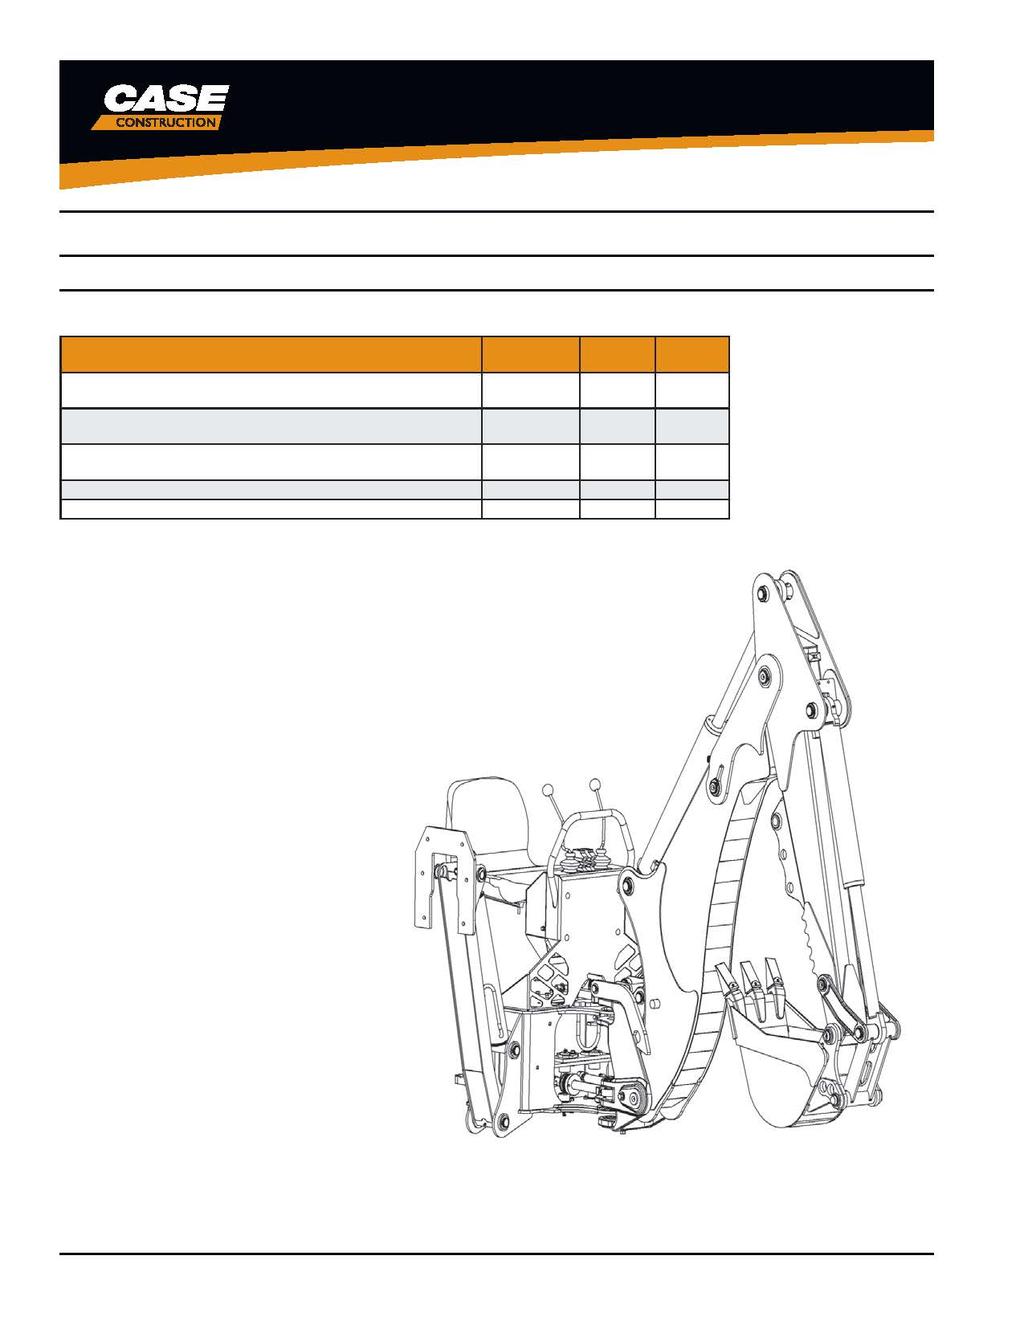 BACKHOE OPTIONS & ACCESSORIES FIELD INSTALLED OPTIONS (Order as Needed) - continued I T I T 1- -l 2-Way Auxiliary Hydraulic Kit for 509, 511(for hydraulic thumb, 87034128 60 $1,391.